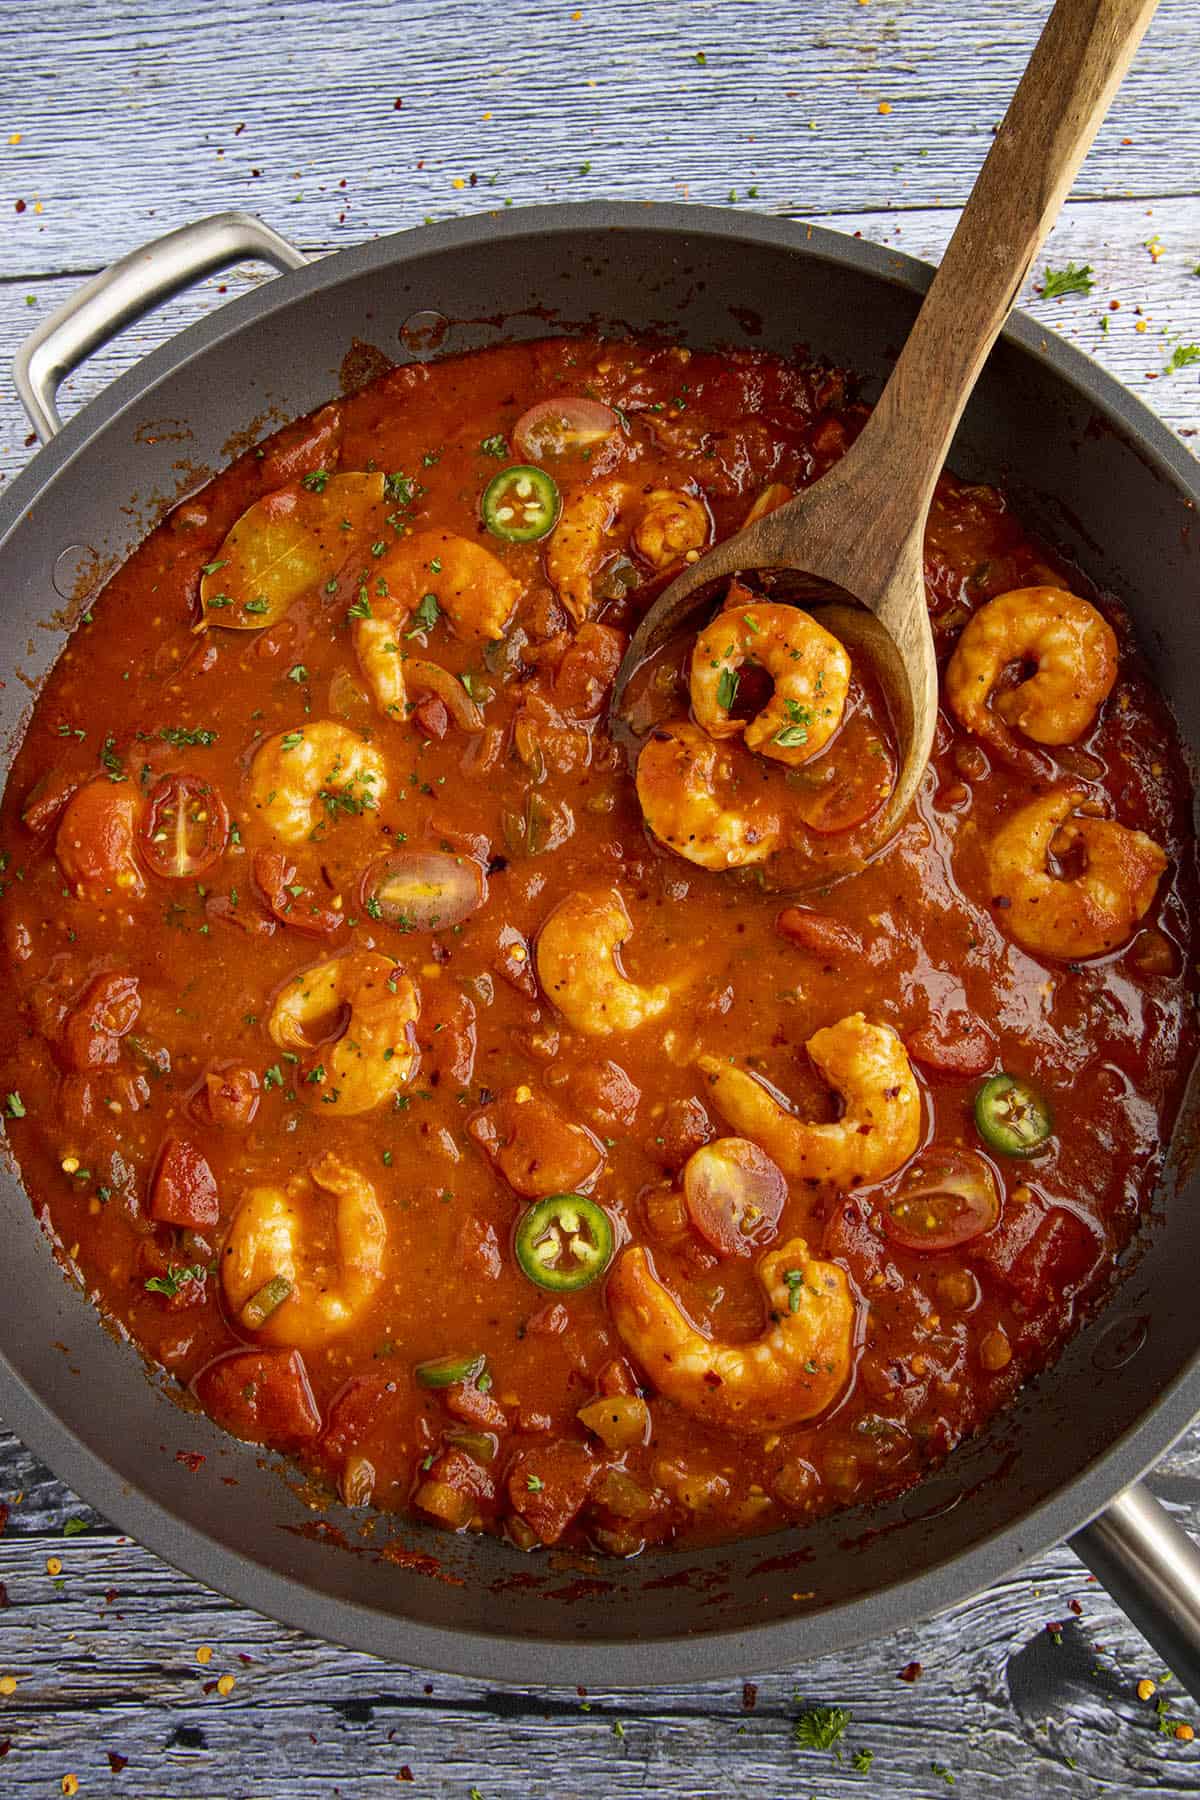 Serving Shrimp Creole from the pan